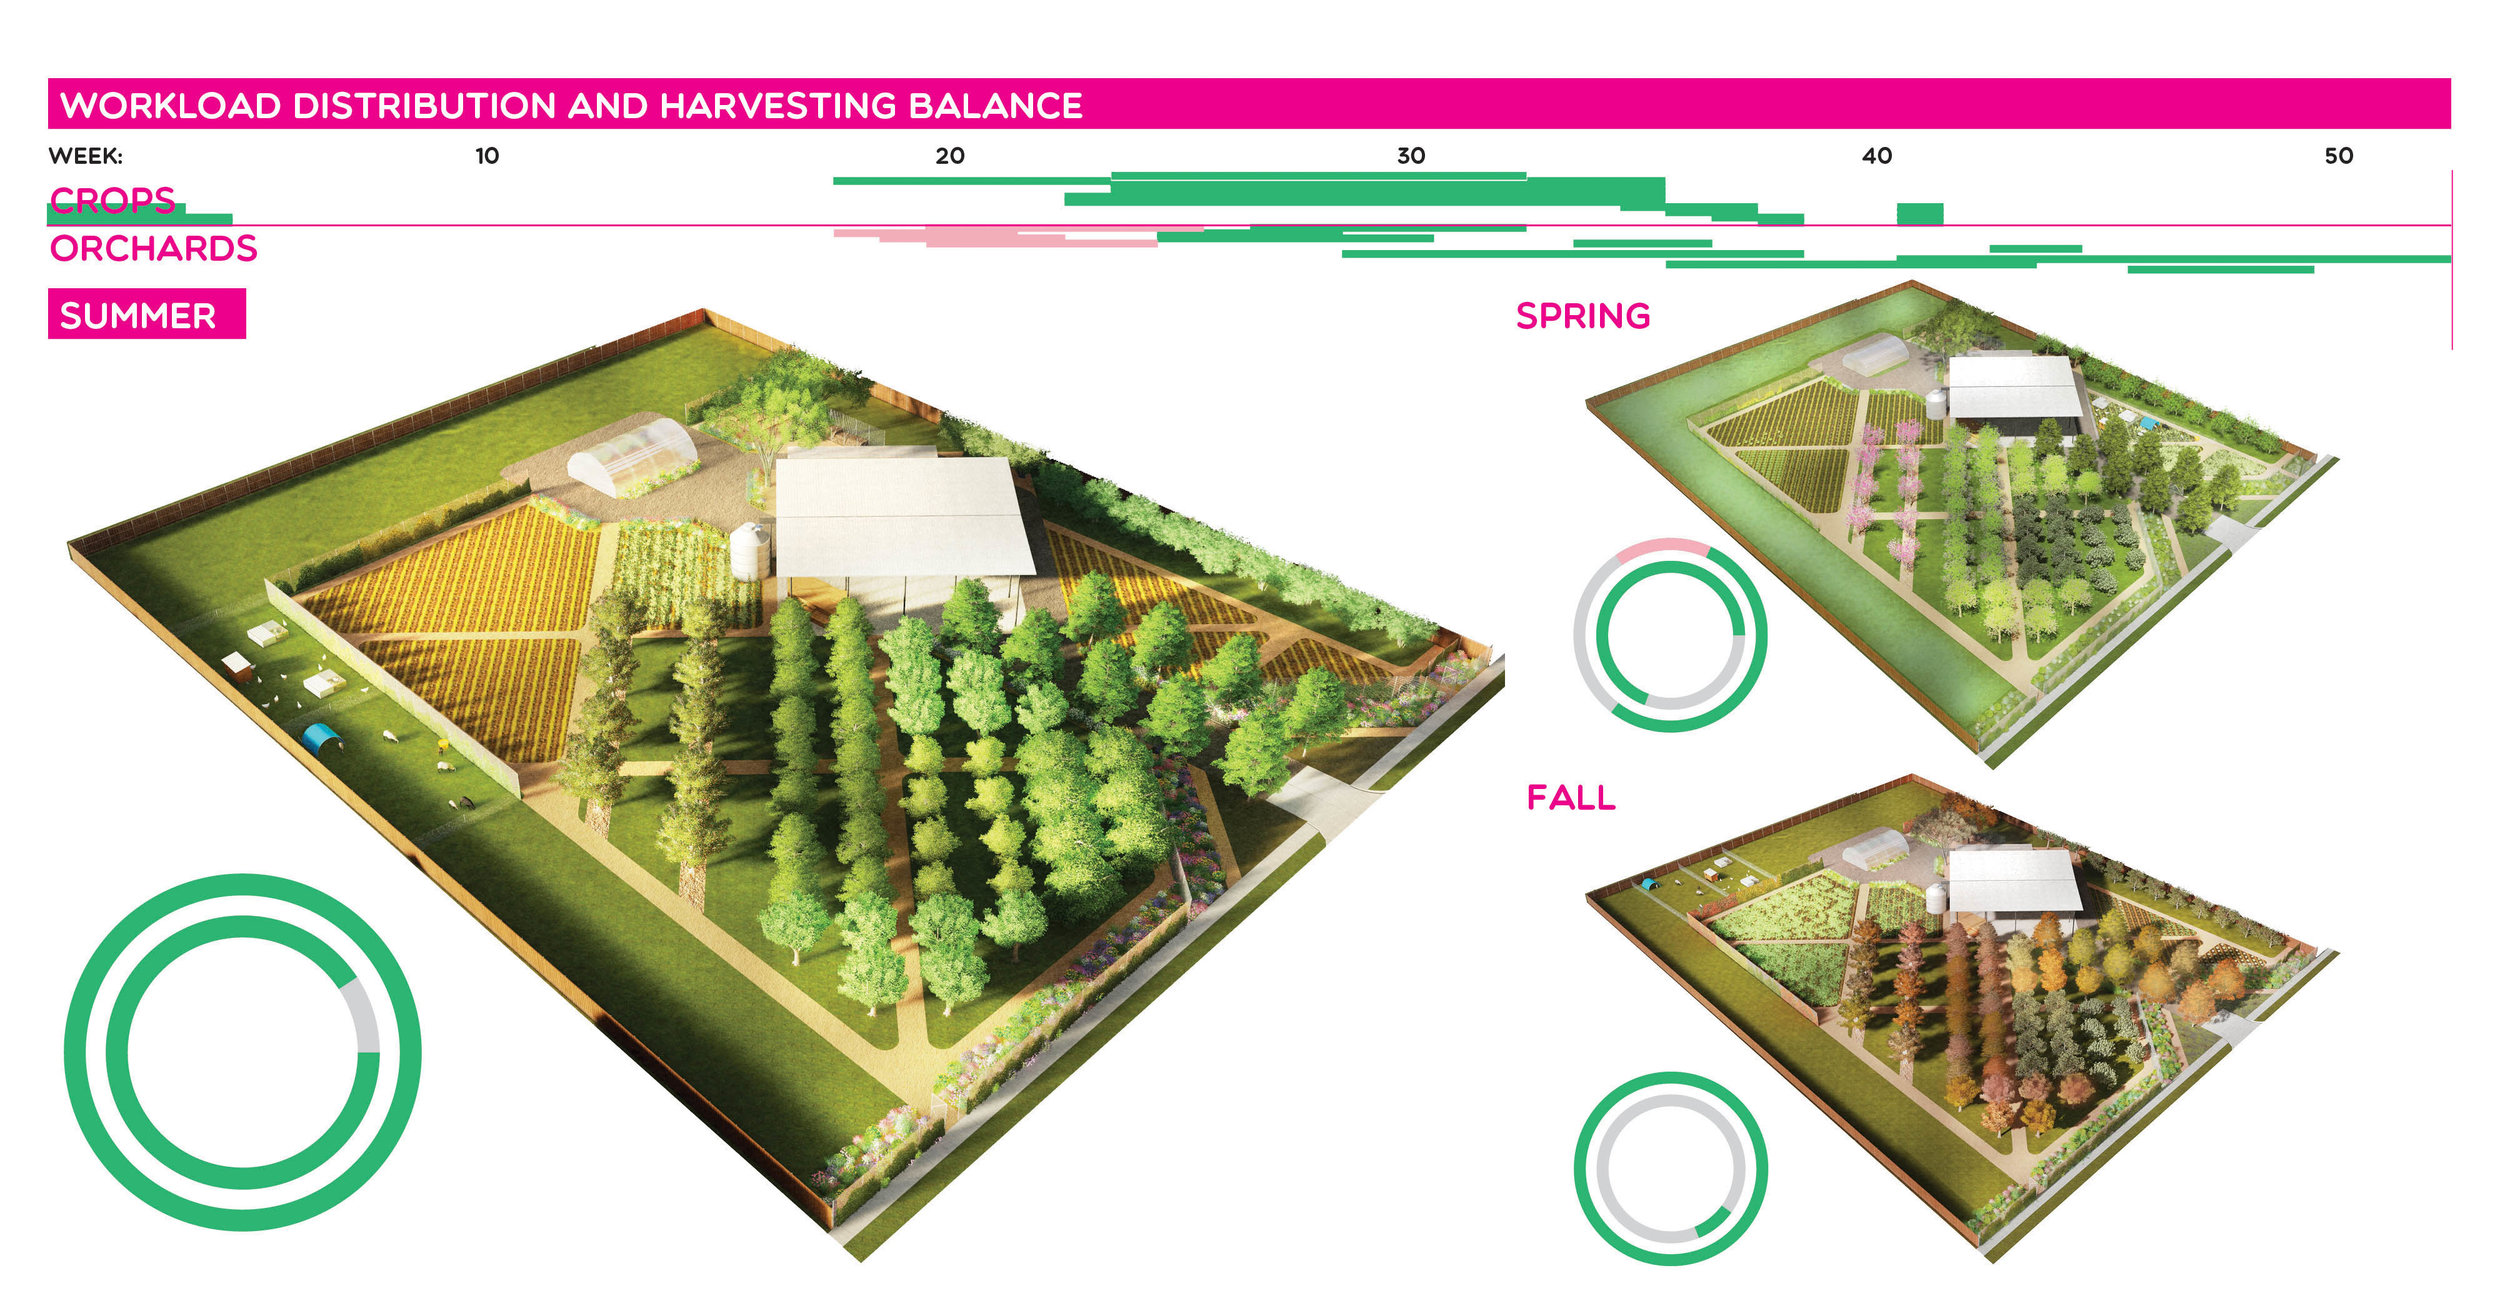  The compact size of the farm necessitates using every part of it as much of the year as possible. This image illustrates the various market crops, cover crops, and grazing that occurs on a handful of vegetable plots throughout the different seasons.